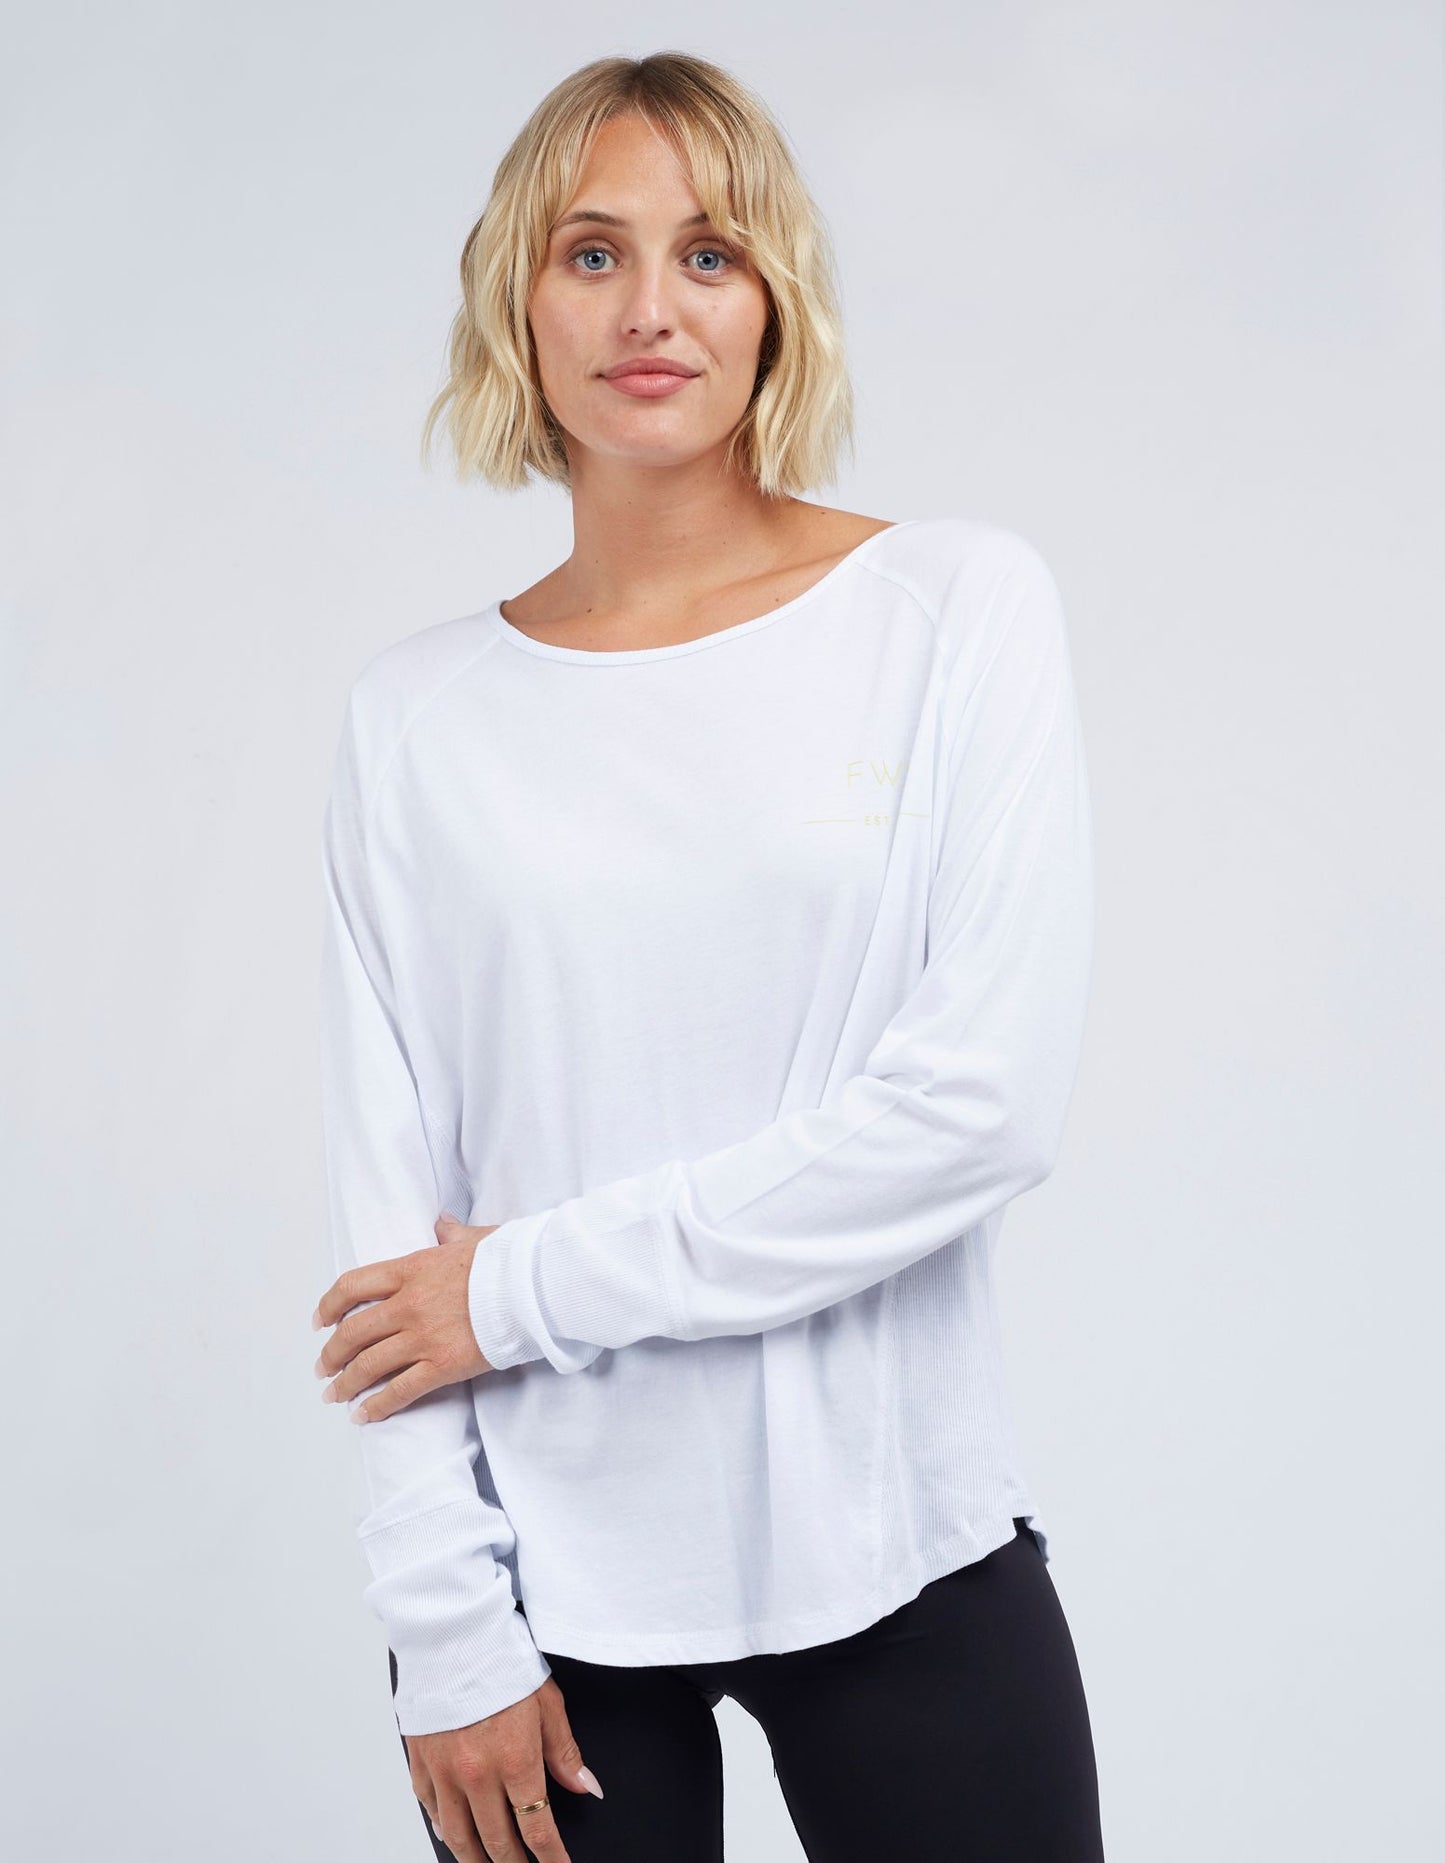 Extend L/S Tee - White - Foxwood - FUDGE Gifts Home Lifestyle